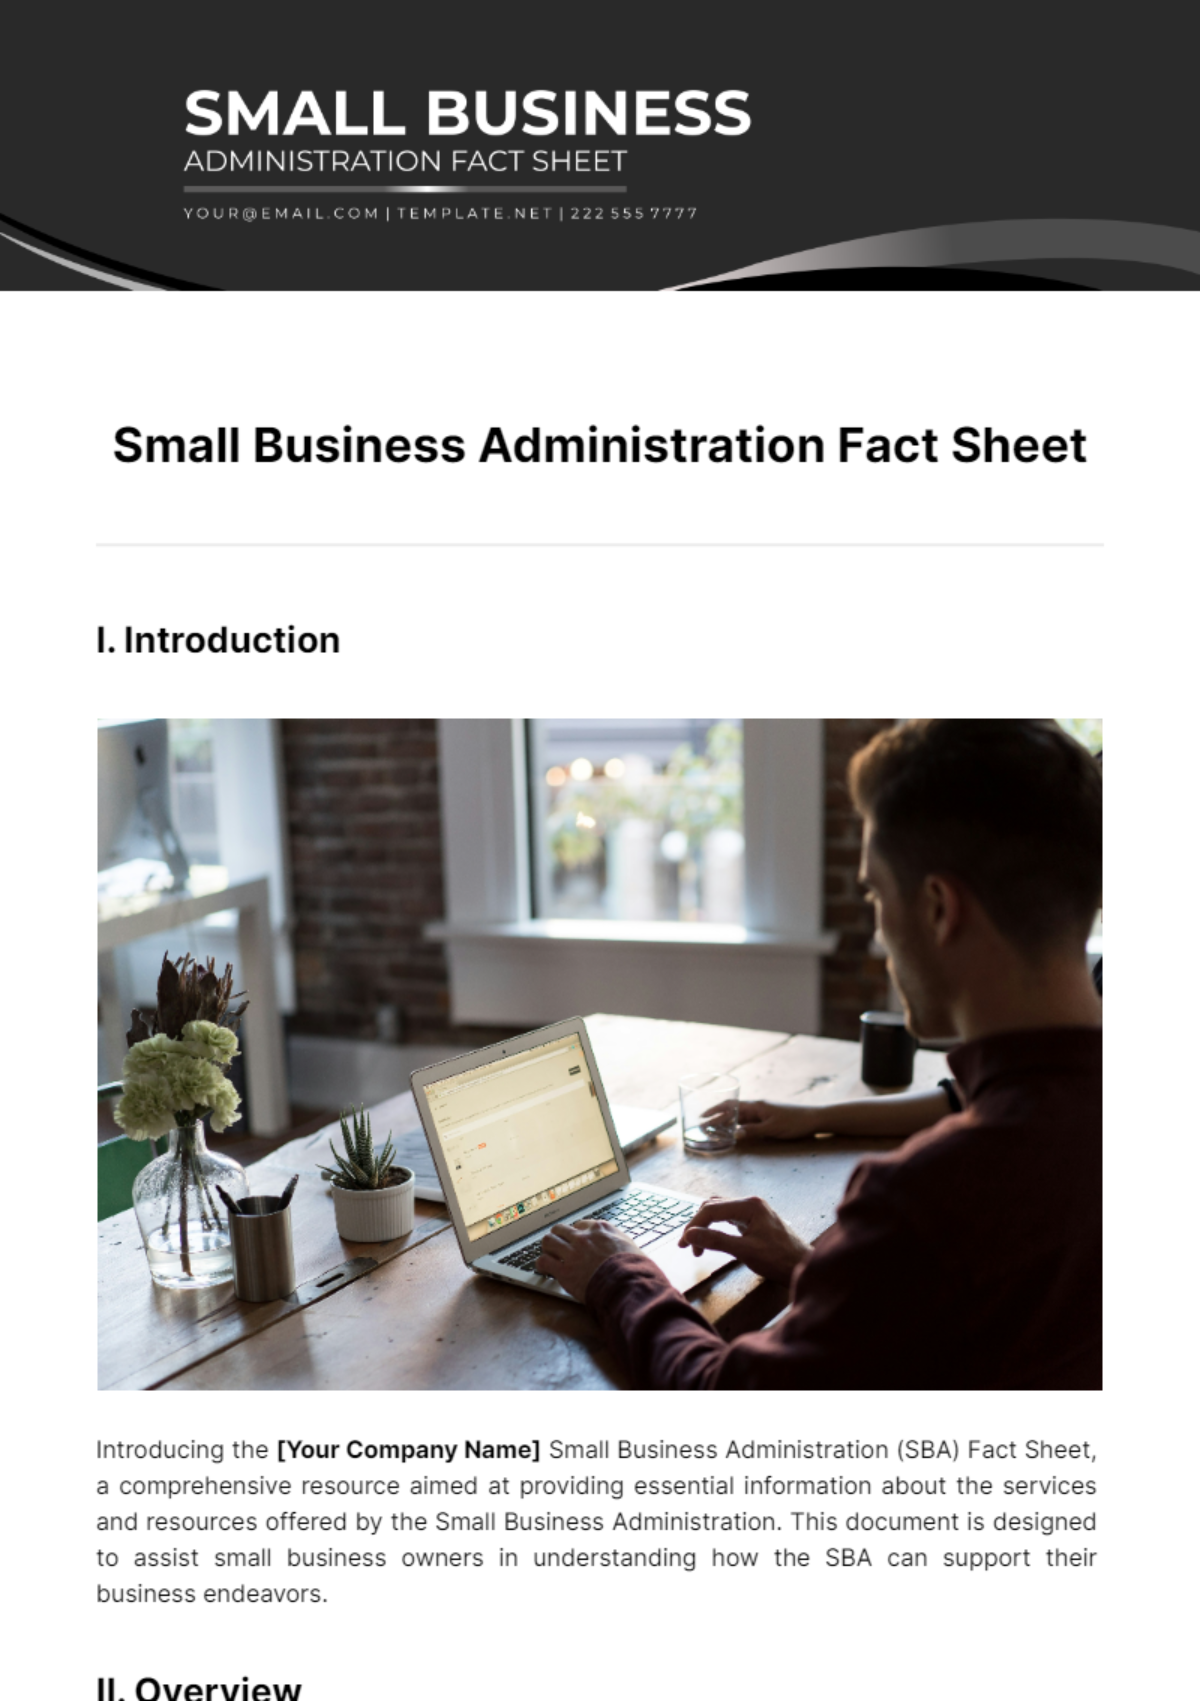 Small Business Administration Fact Sheet Template